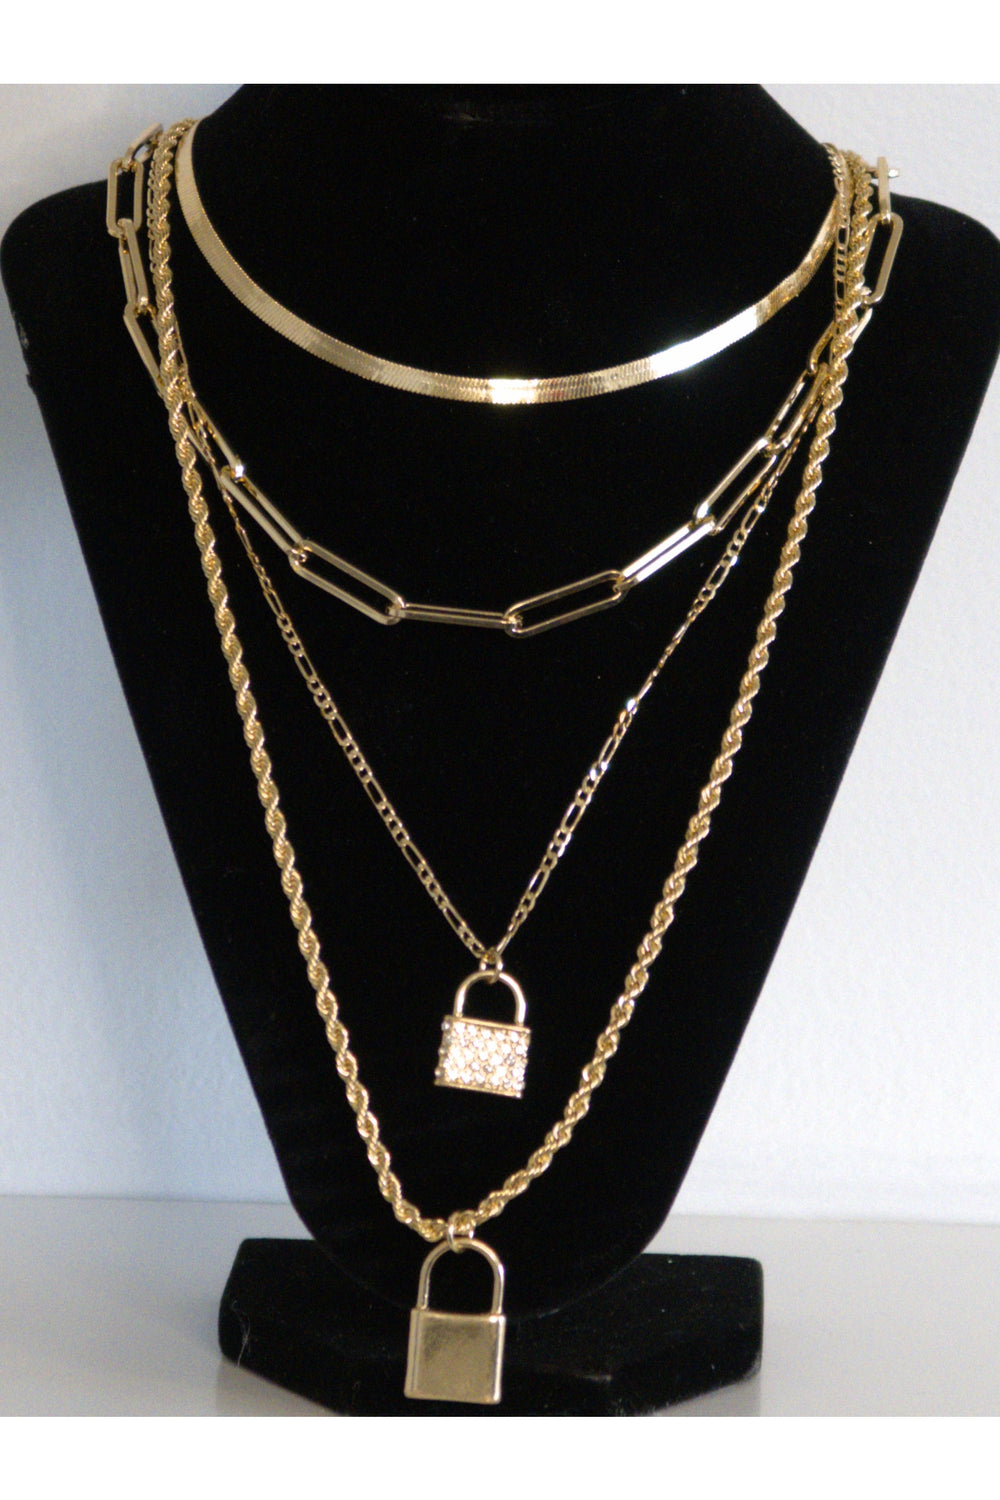 The New Yorker Layered Pad Lock Rhinestone Necklace - Expressive Collective CO.